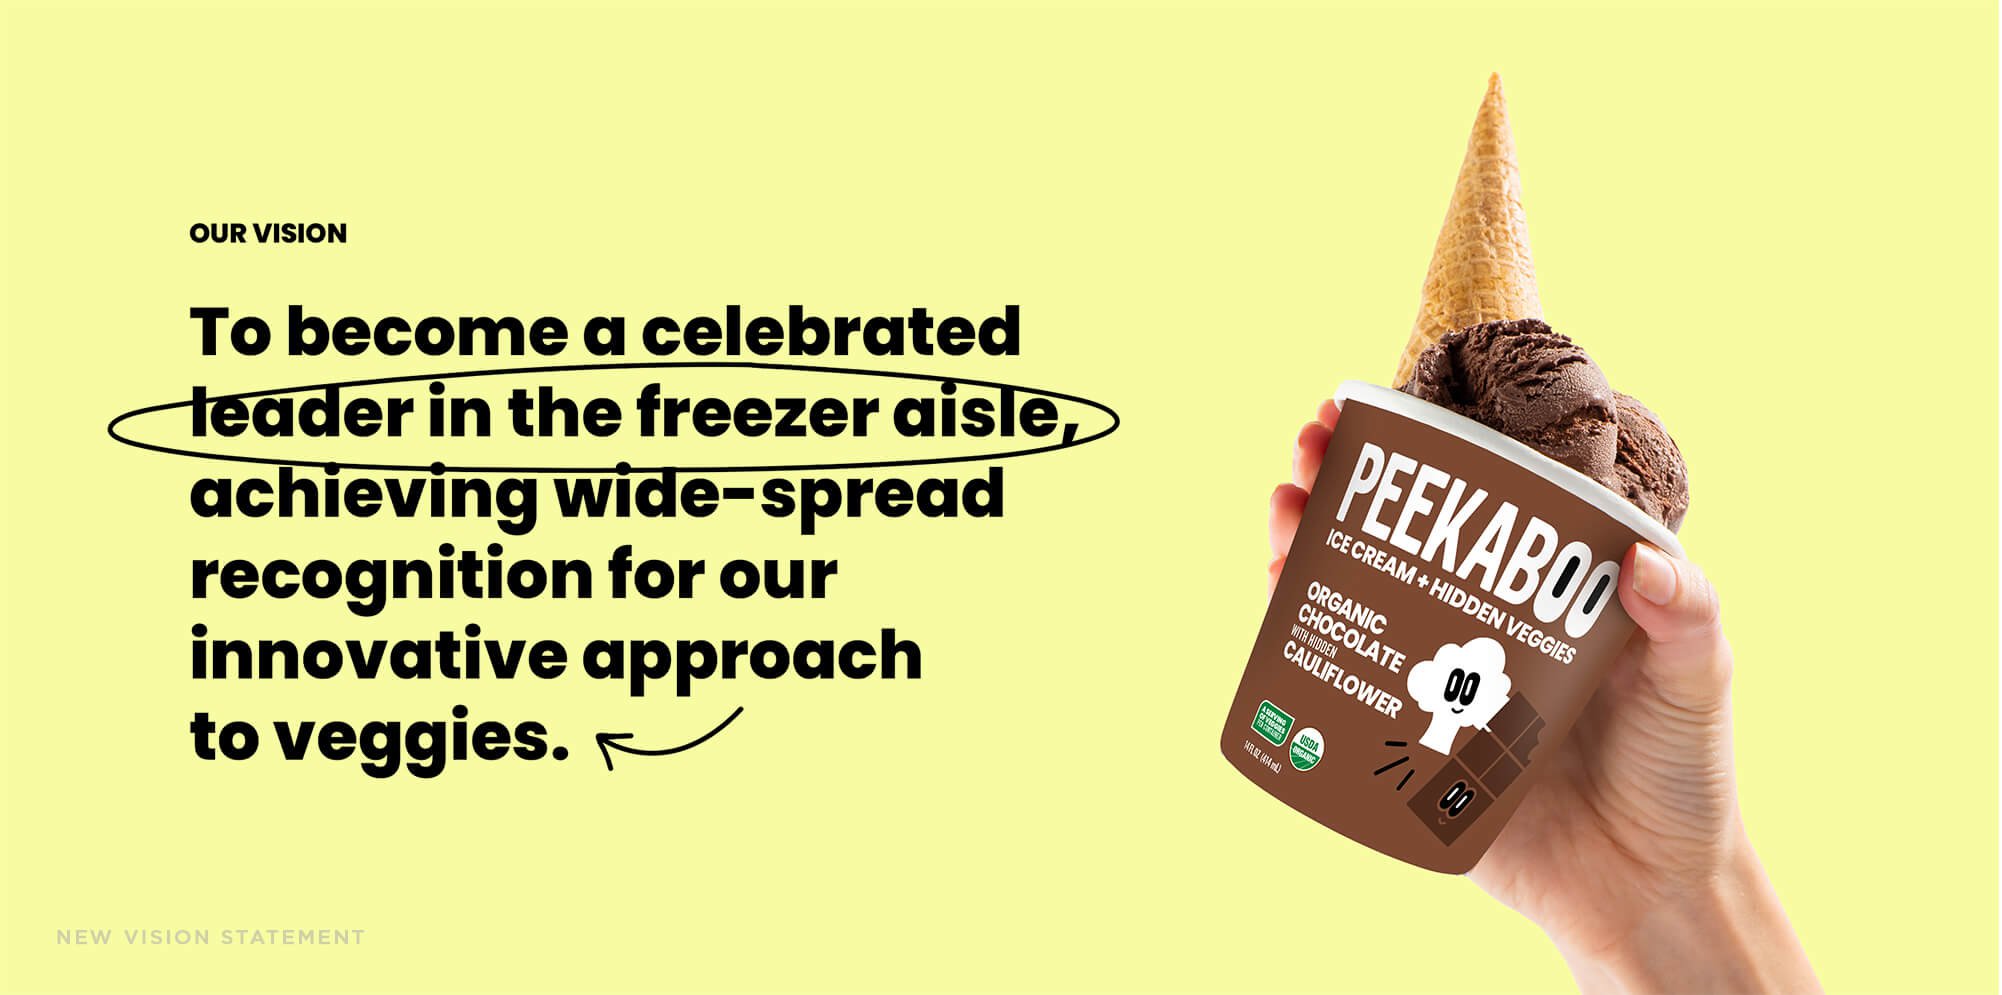 Jacober rebranding of Peekaboo Ice Cream. Photo of new vision statement: "To become a celebrated leader in the freezer aisle achieving wide-spread recognition for our innovative approach to veggies.